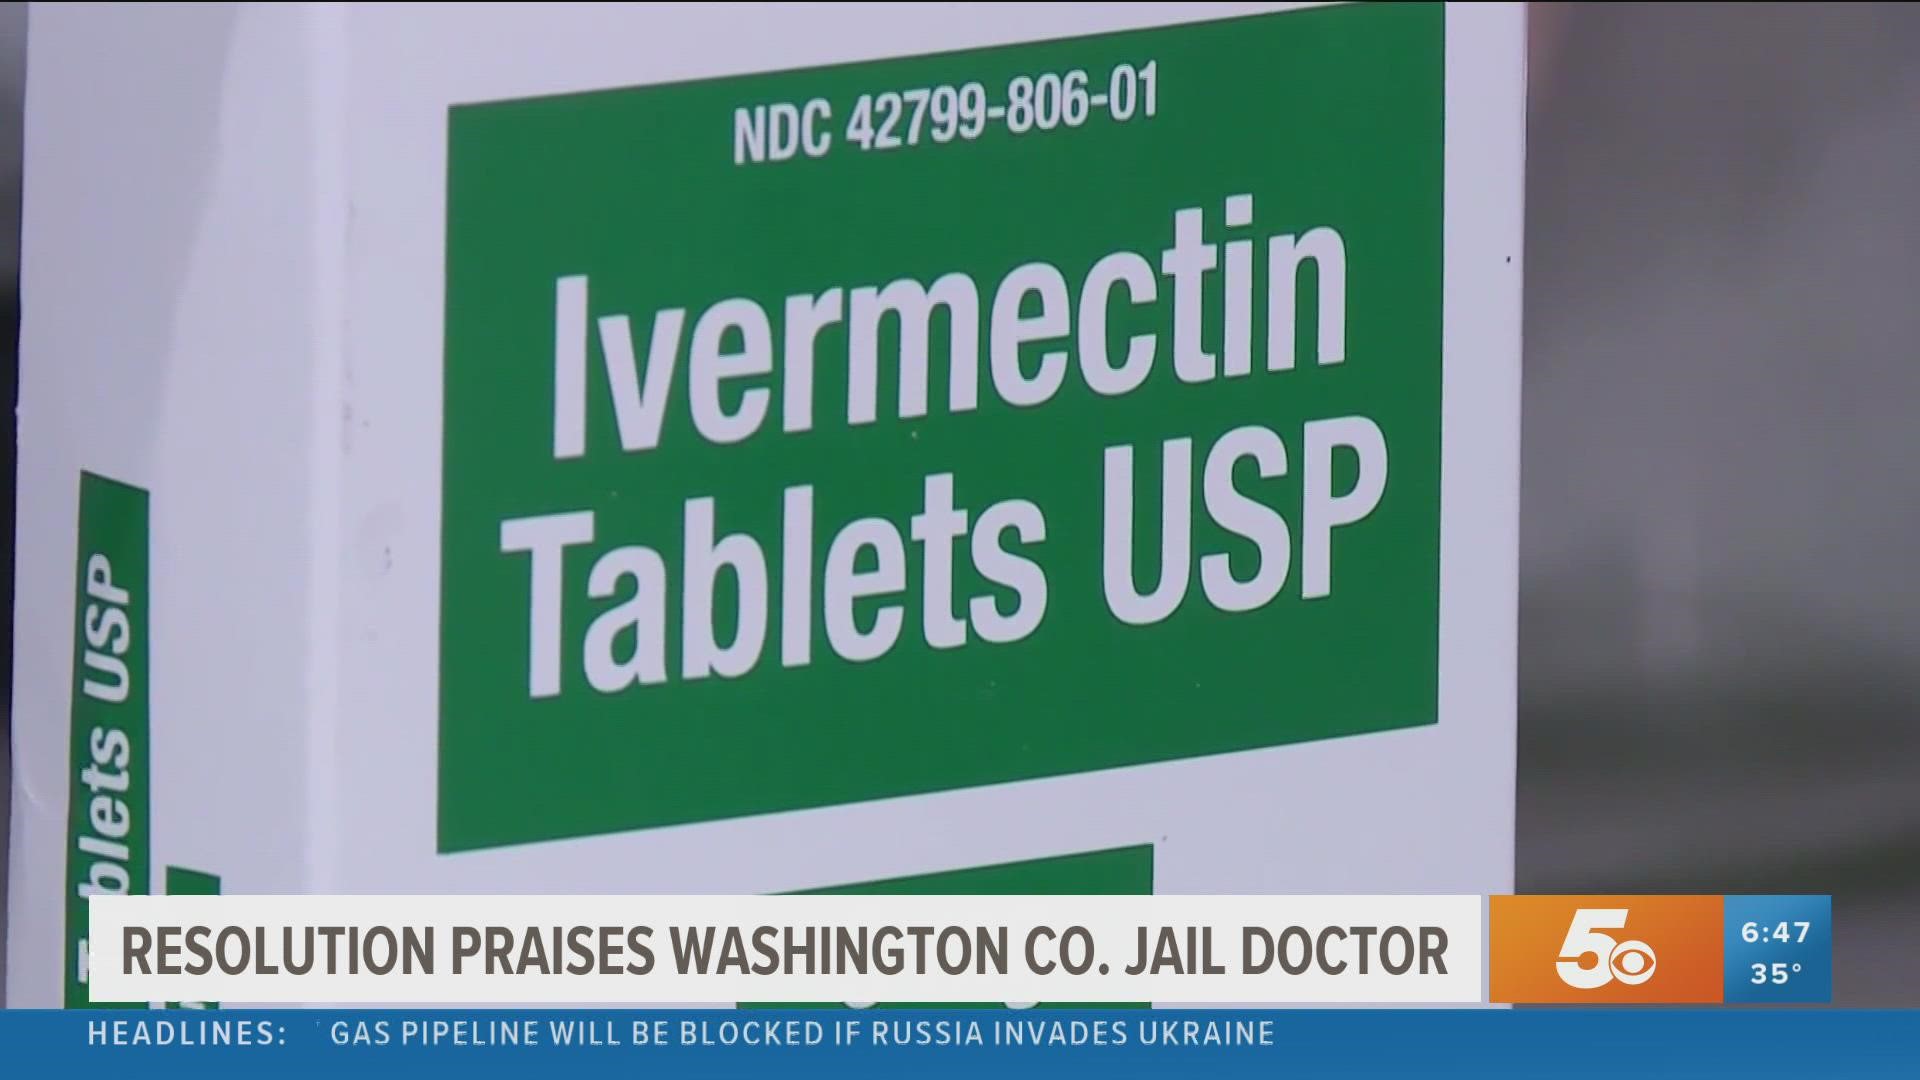 Ivermectin has been approved by the FDA for use by people and animals for some parasitic worms, head lice and skin conditions, but not for treating COVID-19.